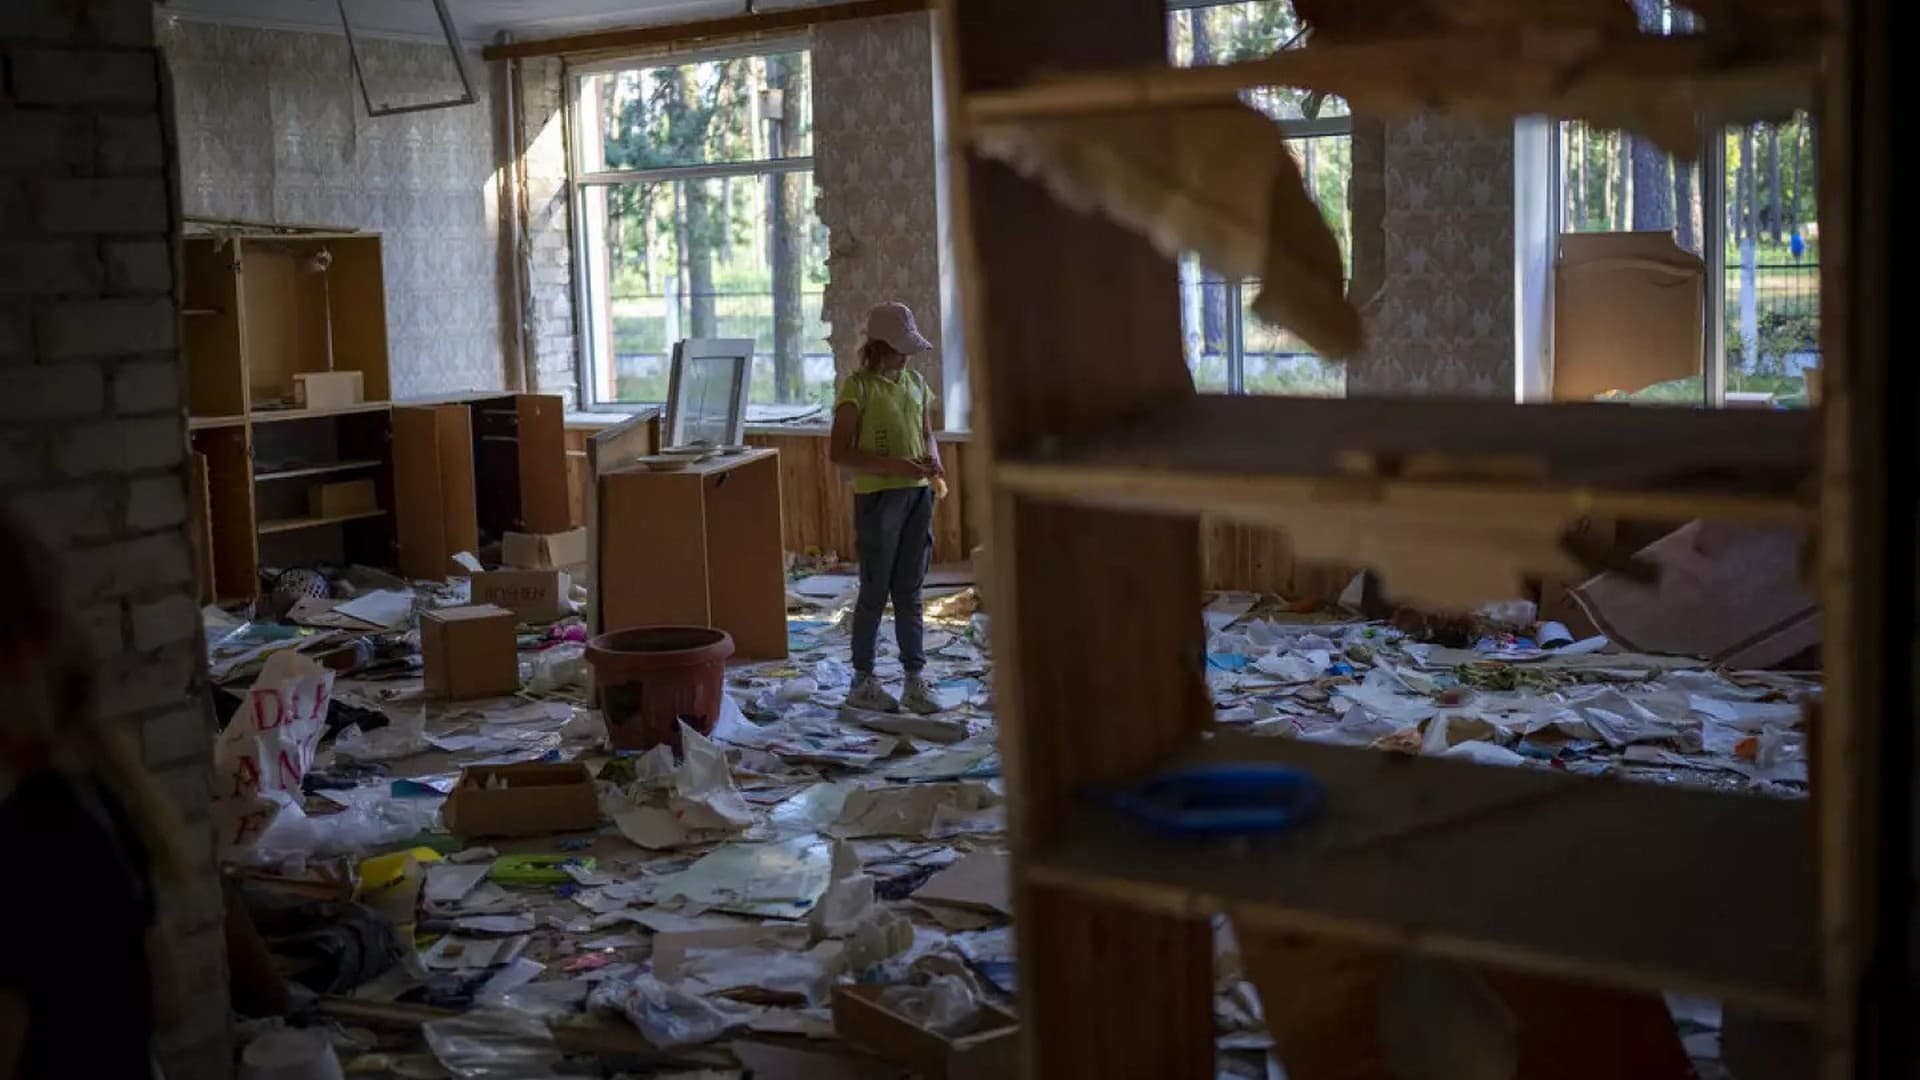 Surrounded by shards of broken glass and rubble 10-year-old Karina Muzyka, stands in the remains of her classroom in the Chernihiv School #21